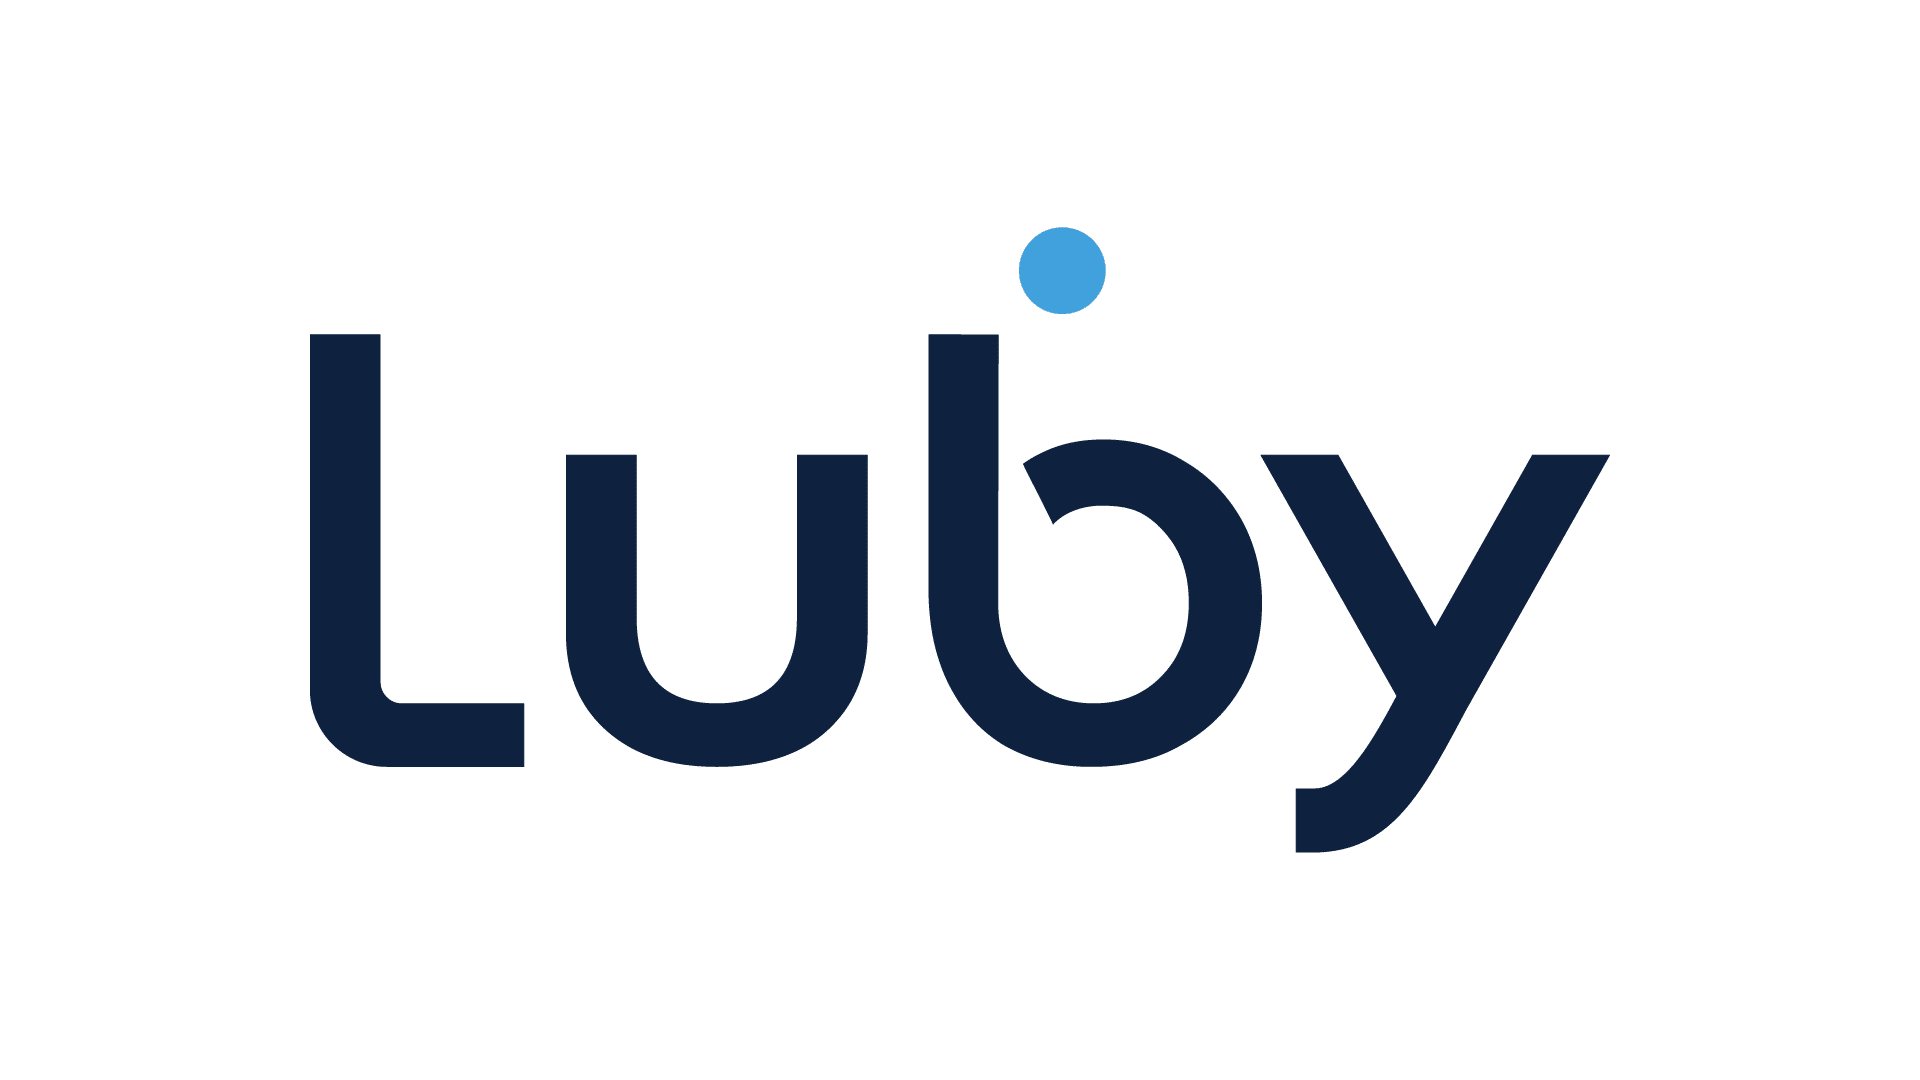 Luby Software (3)